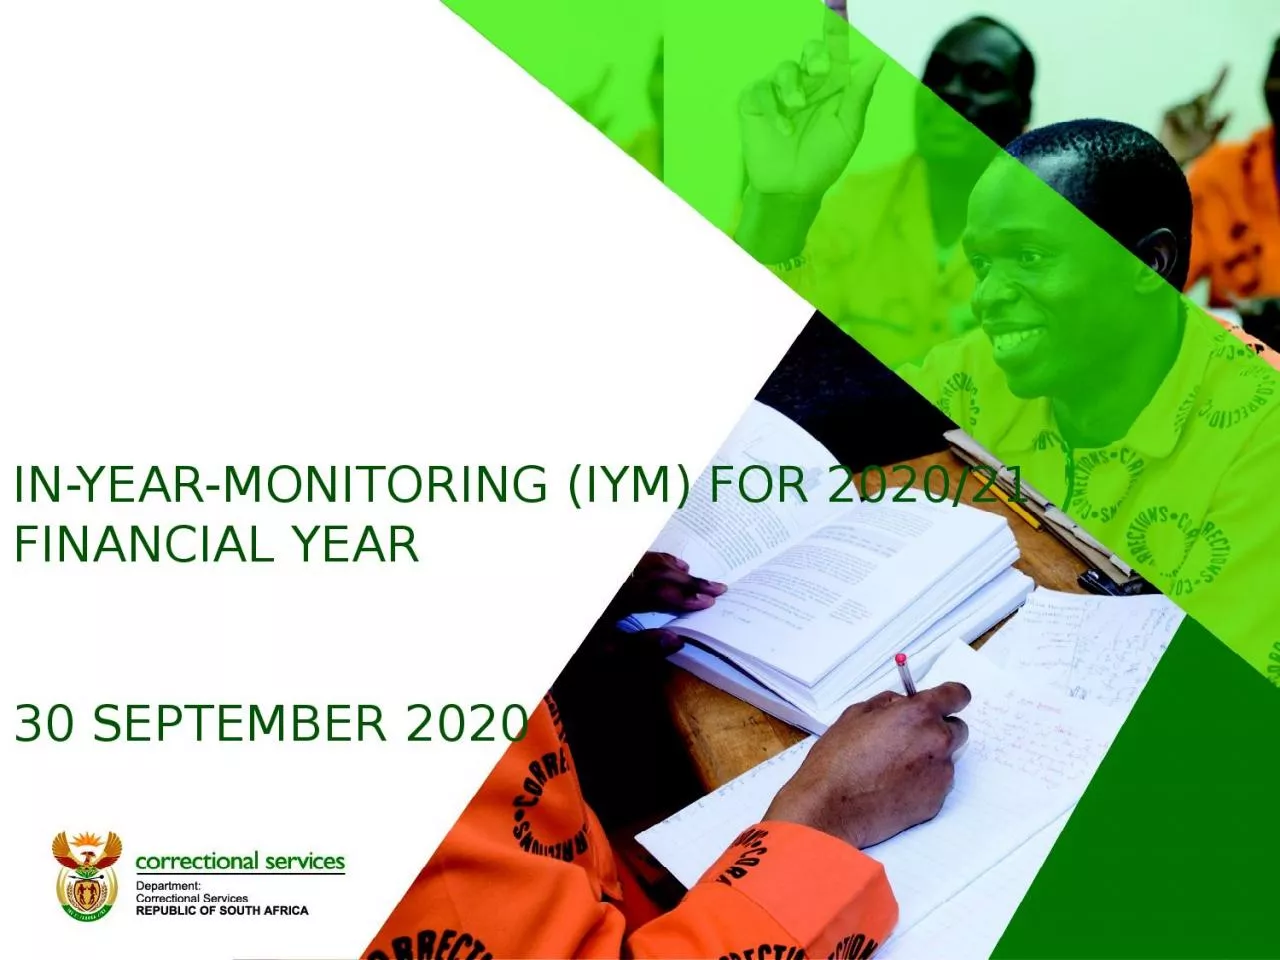 IN-YEAR-MONITORING (IYM) FOR 2020/21 FINANCIAL YEAR